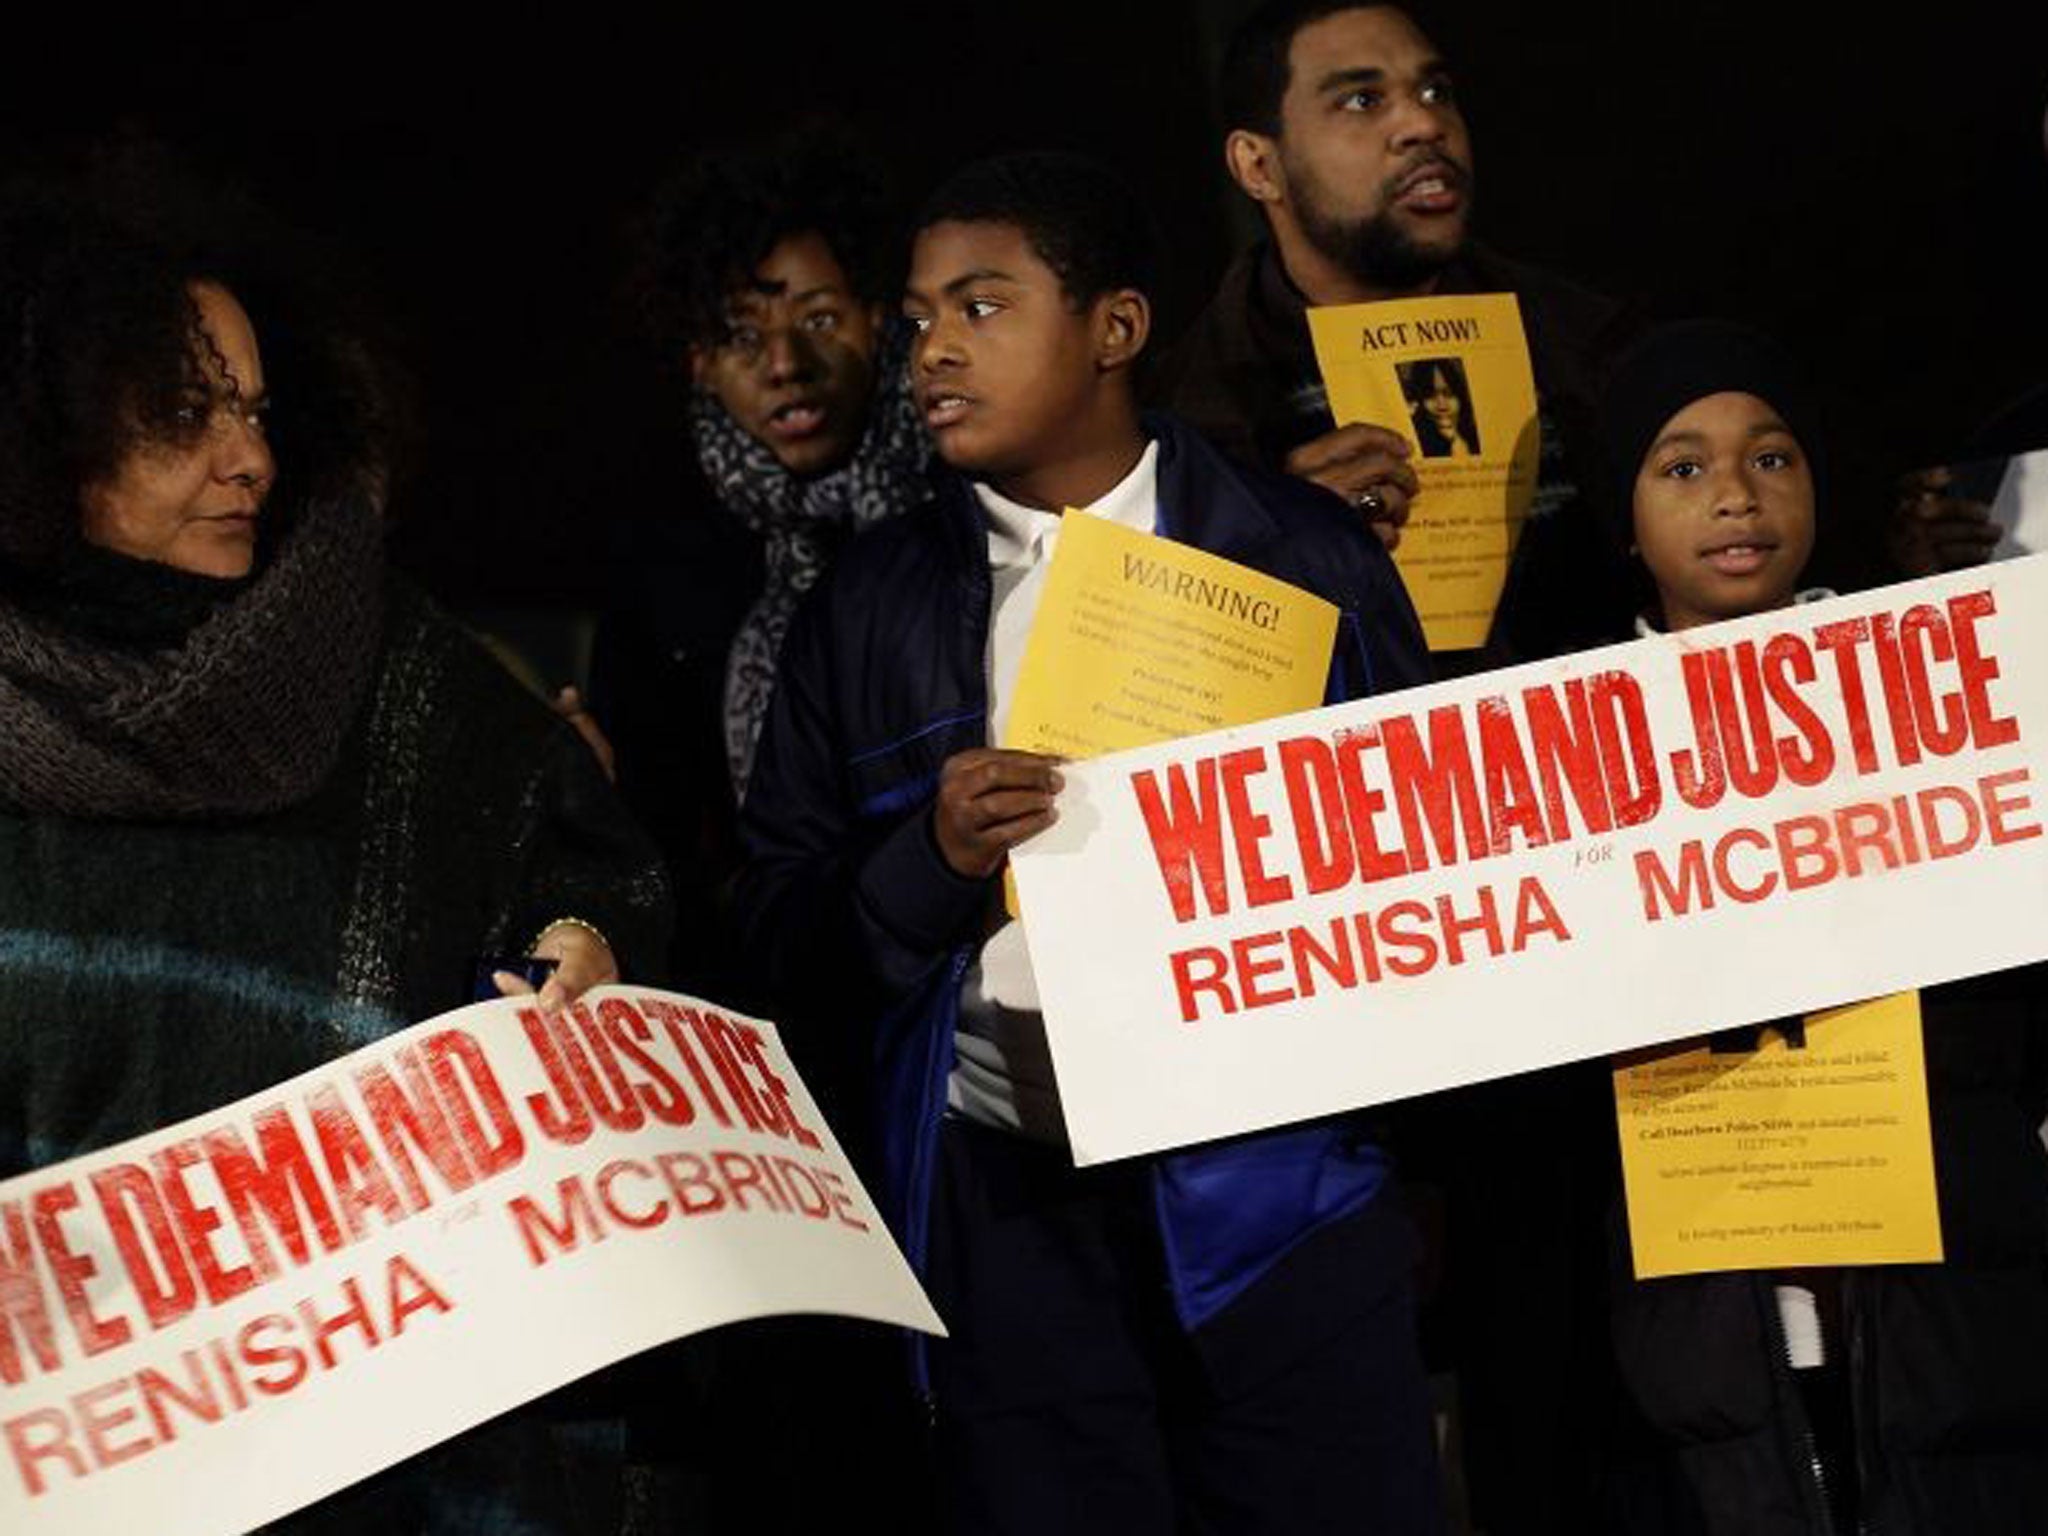 Demonstrators protest against the killing of 19-year-old Renisha McBride outside the Dearborn Heights Police Station in Dearborn Heights, Michigan November 7, 2013.